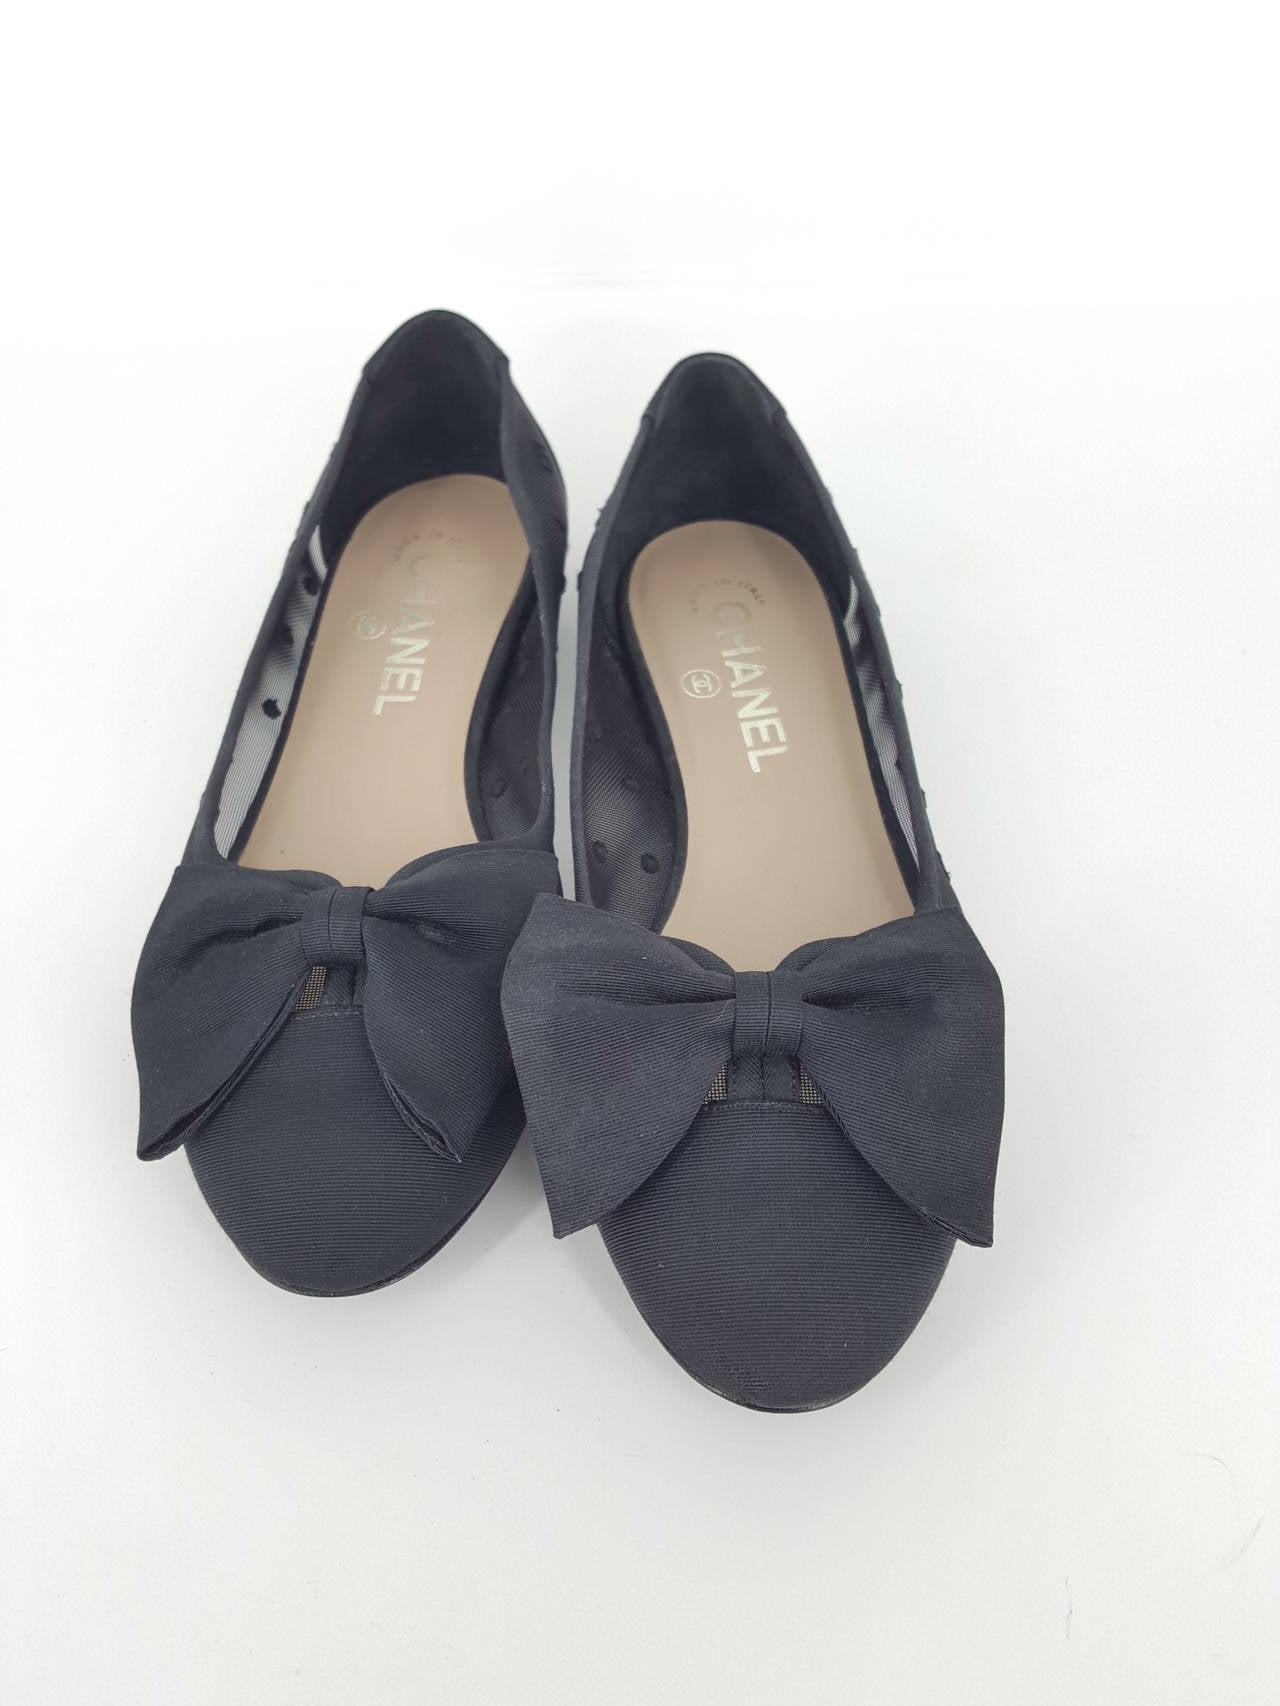 Offered for sale is this darling pair of Chanel ballet flats in black fabric and mesh with the number 